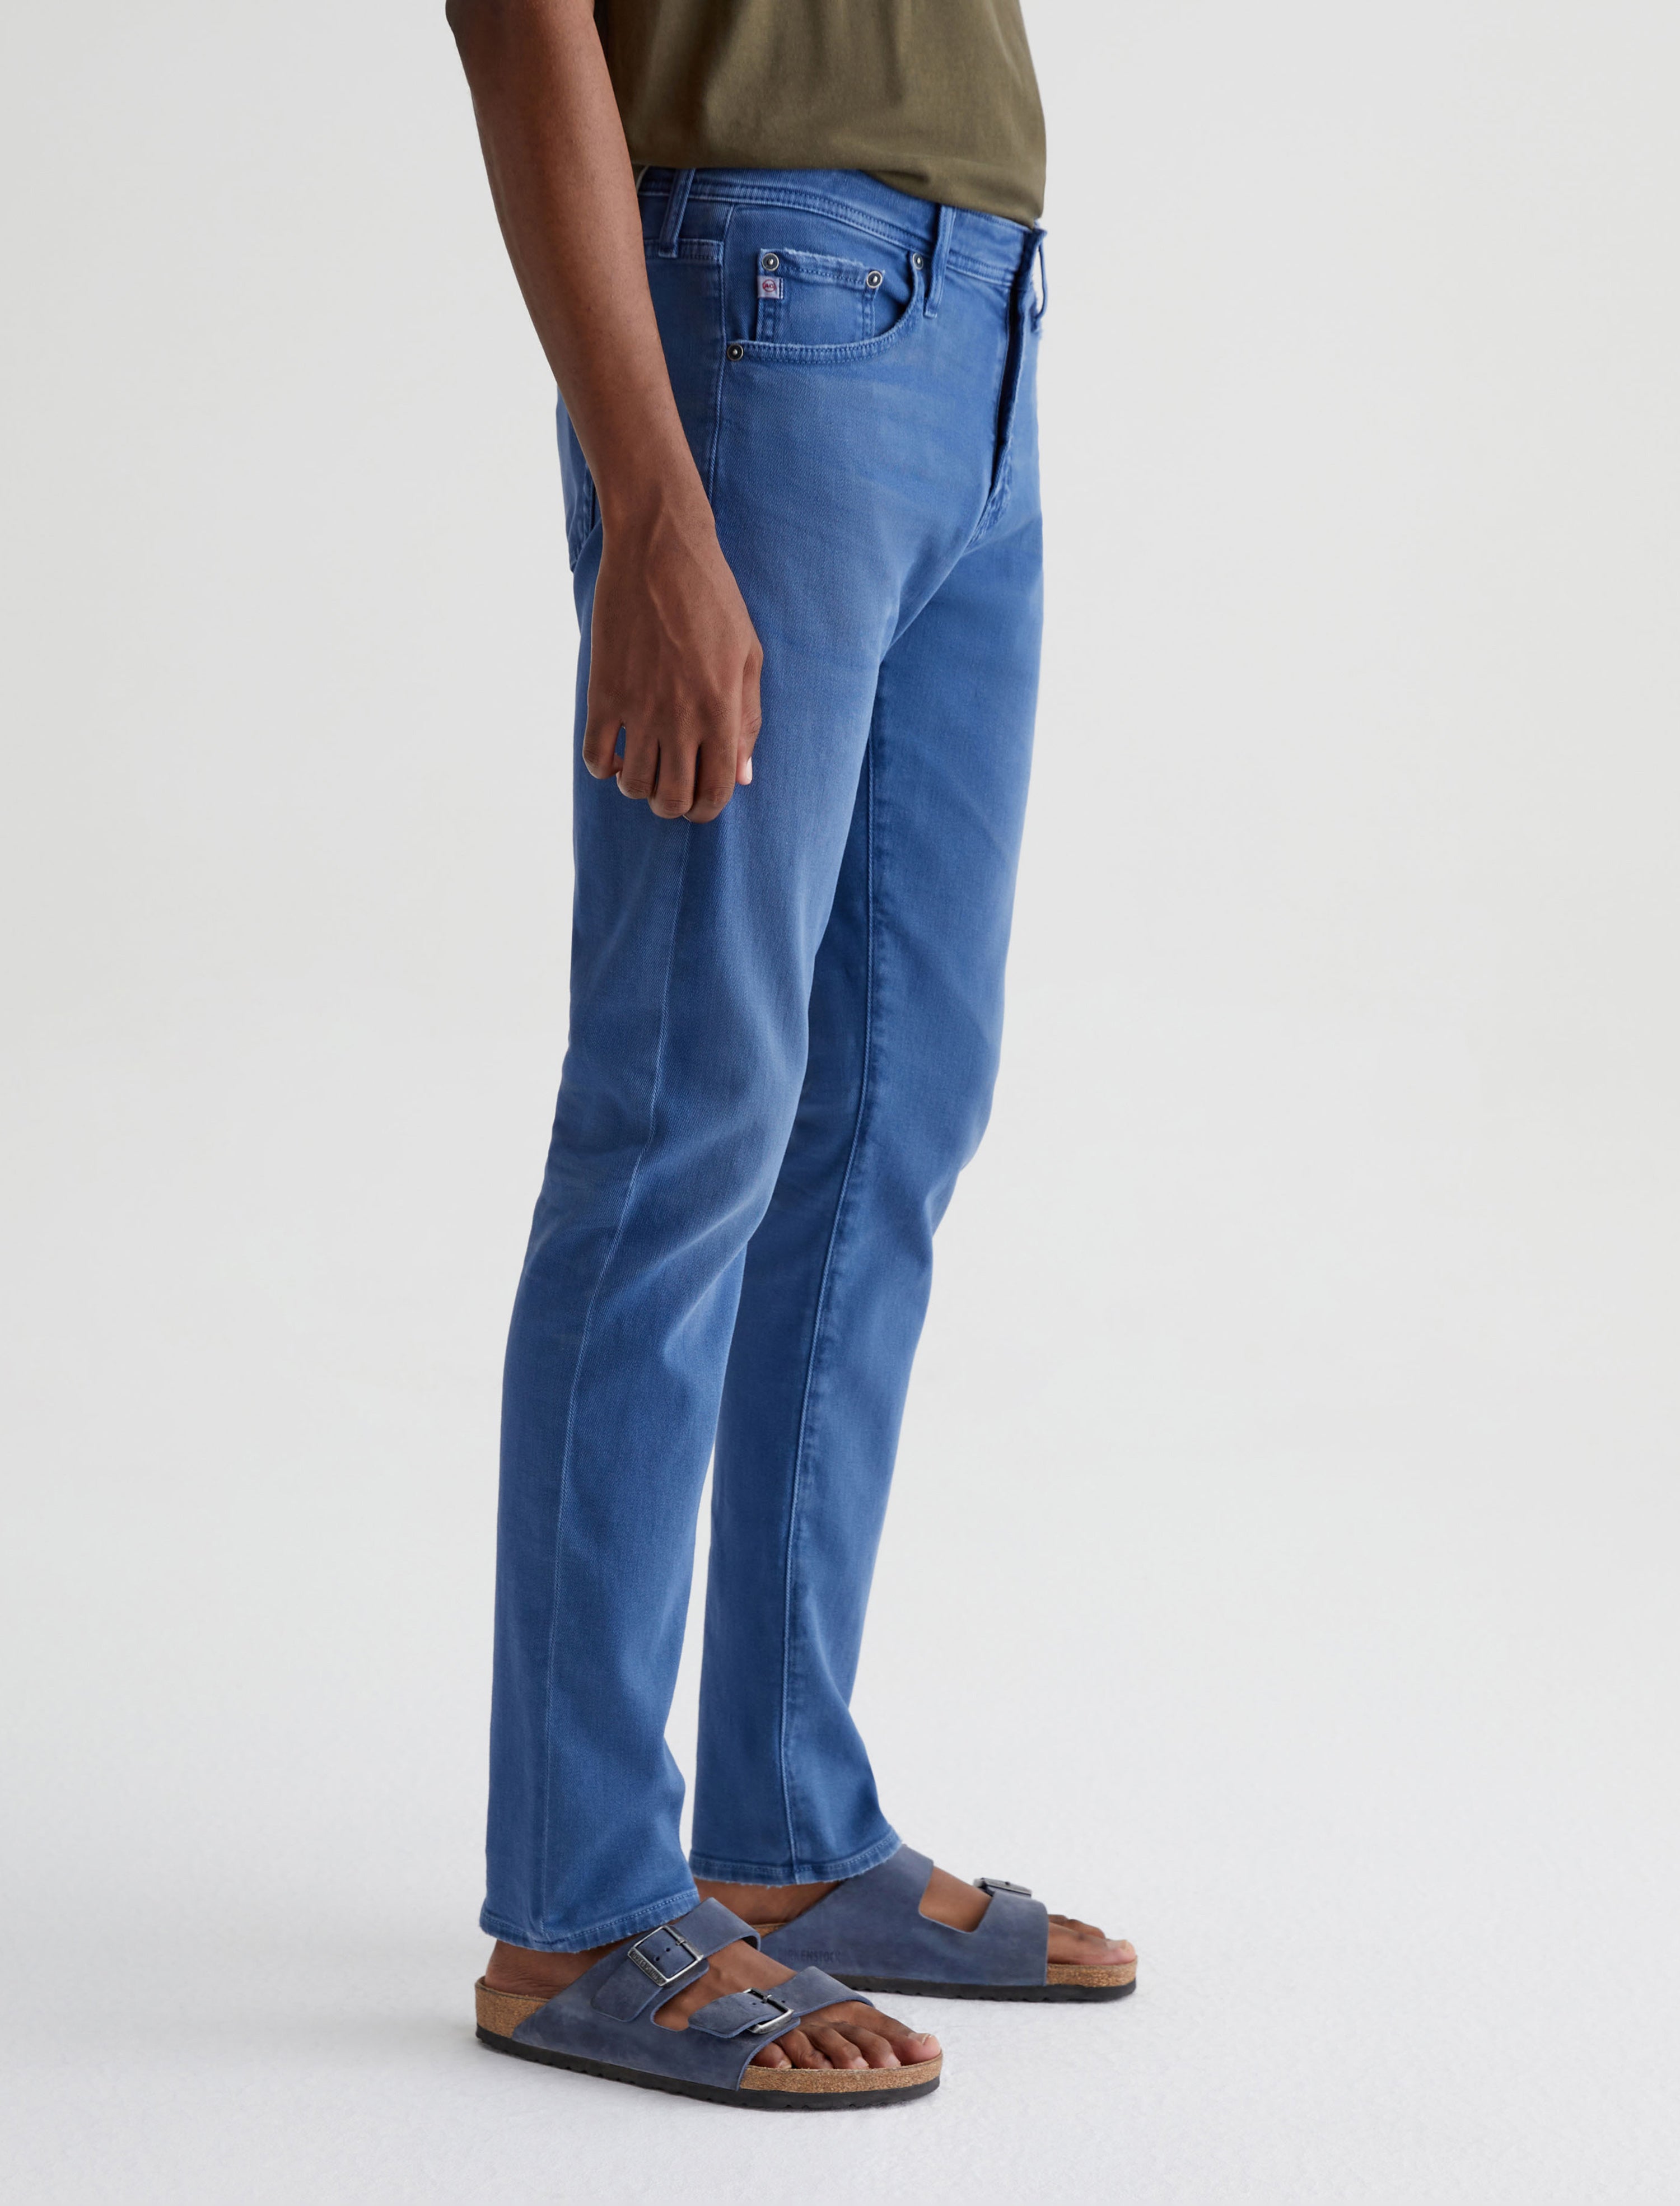 Mens Tellis 7 Years Sulfur Rio Azul at AG Jeans Official Store